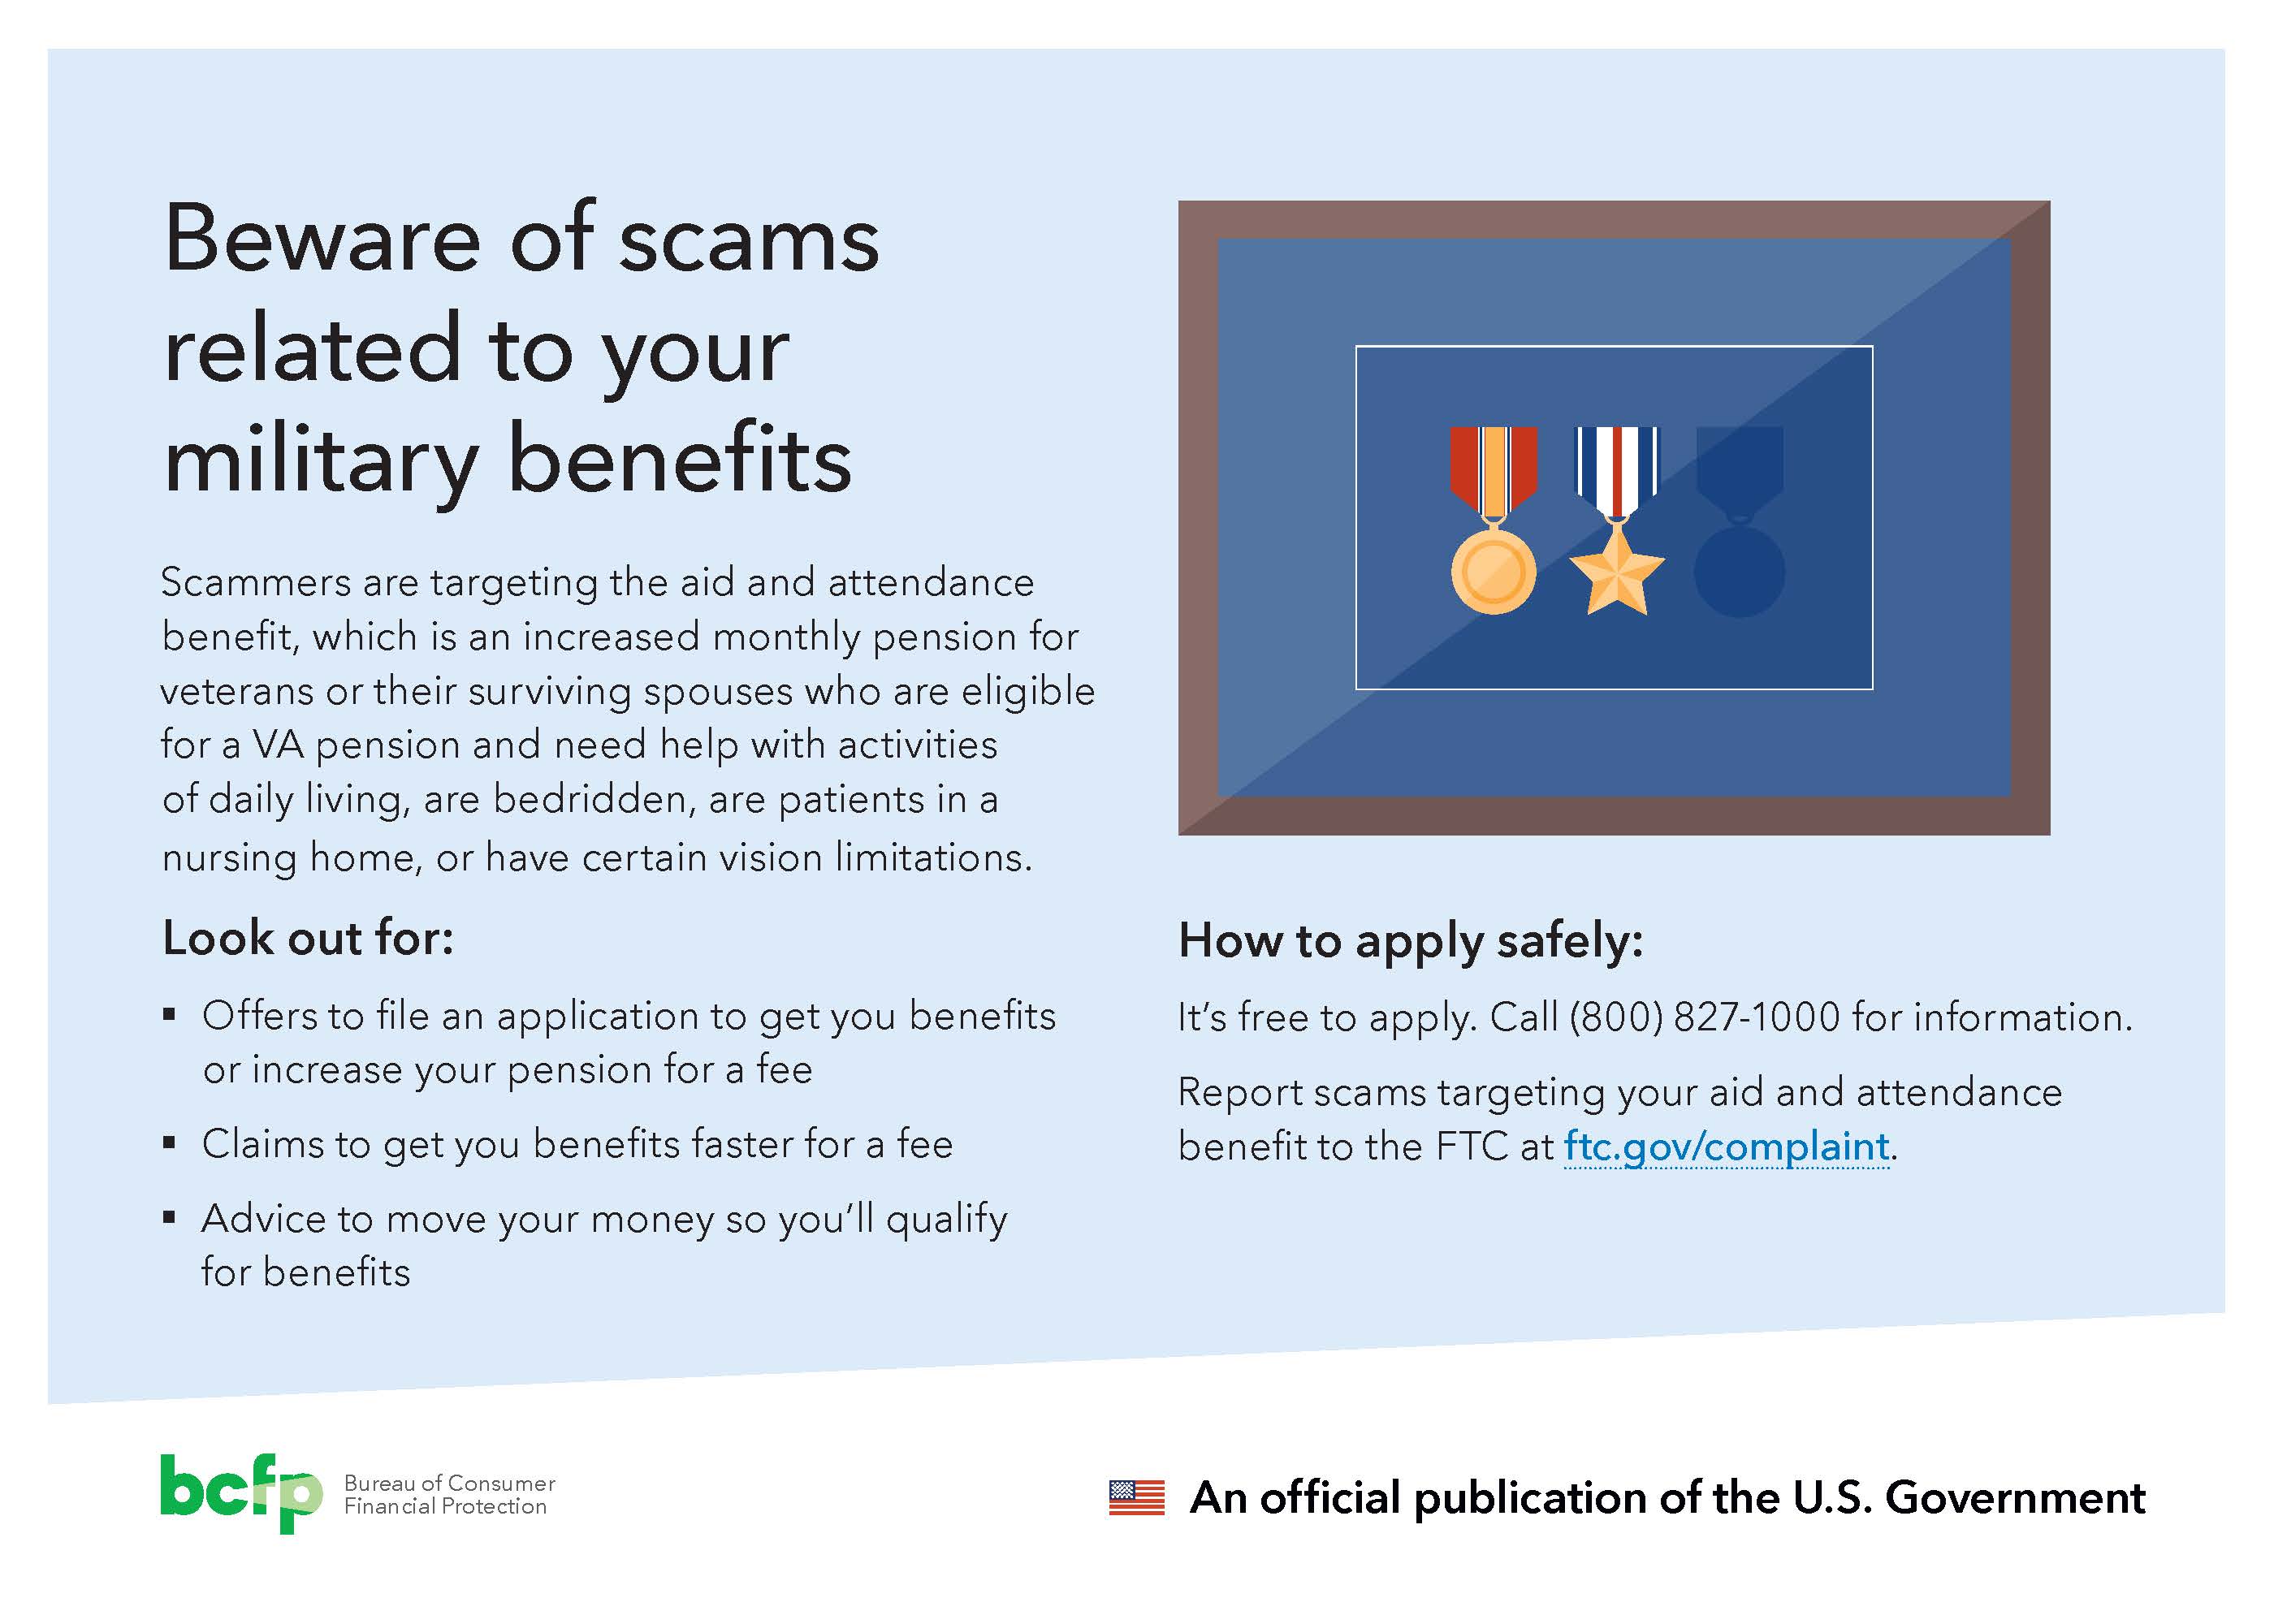 Guide to scams